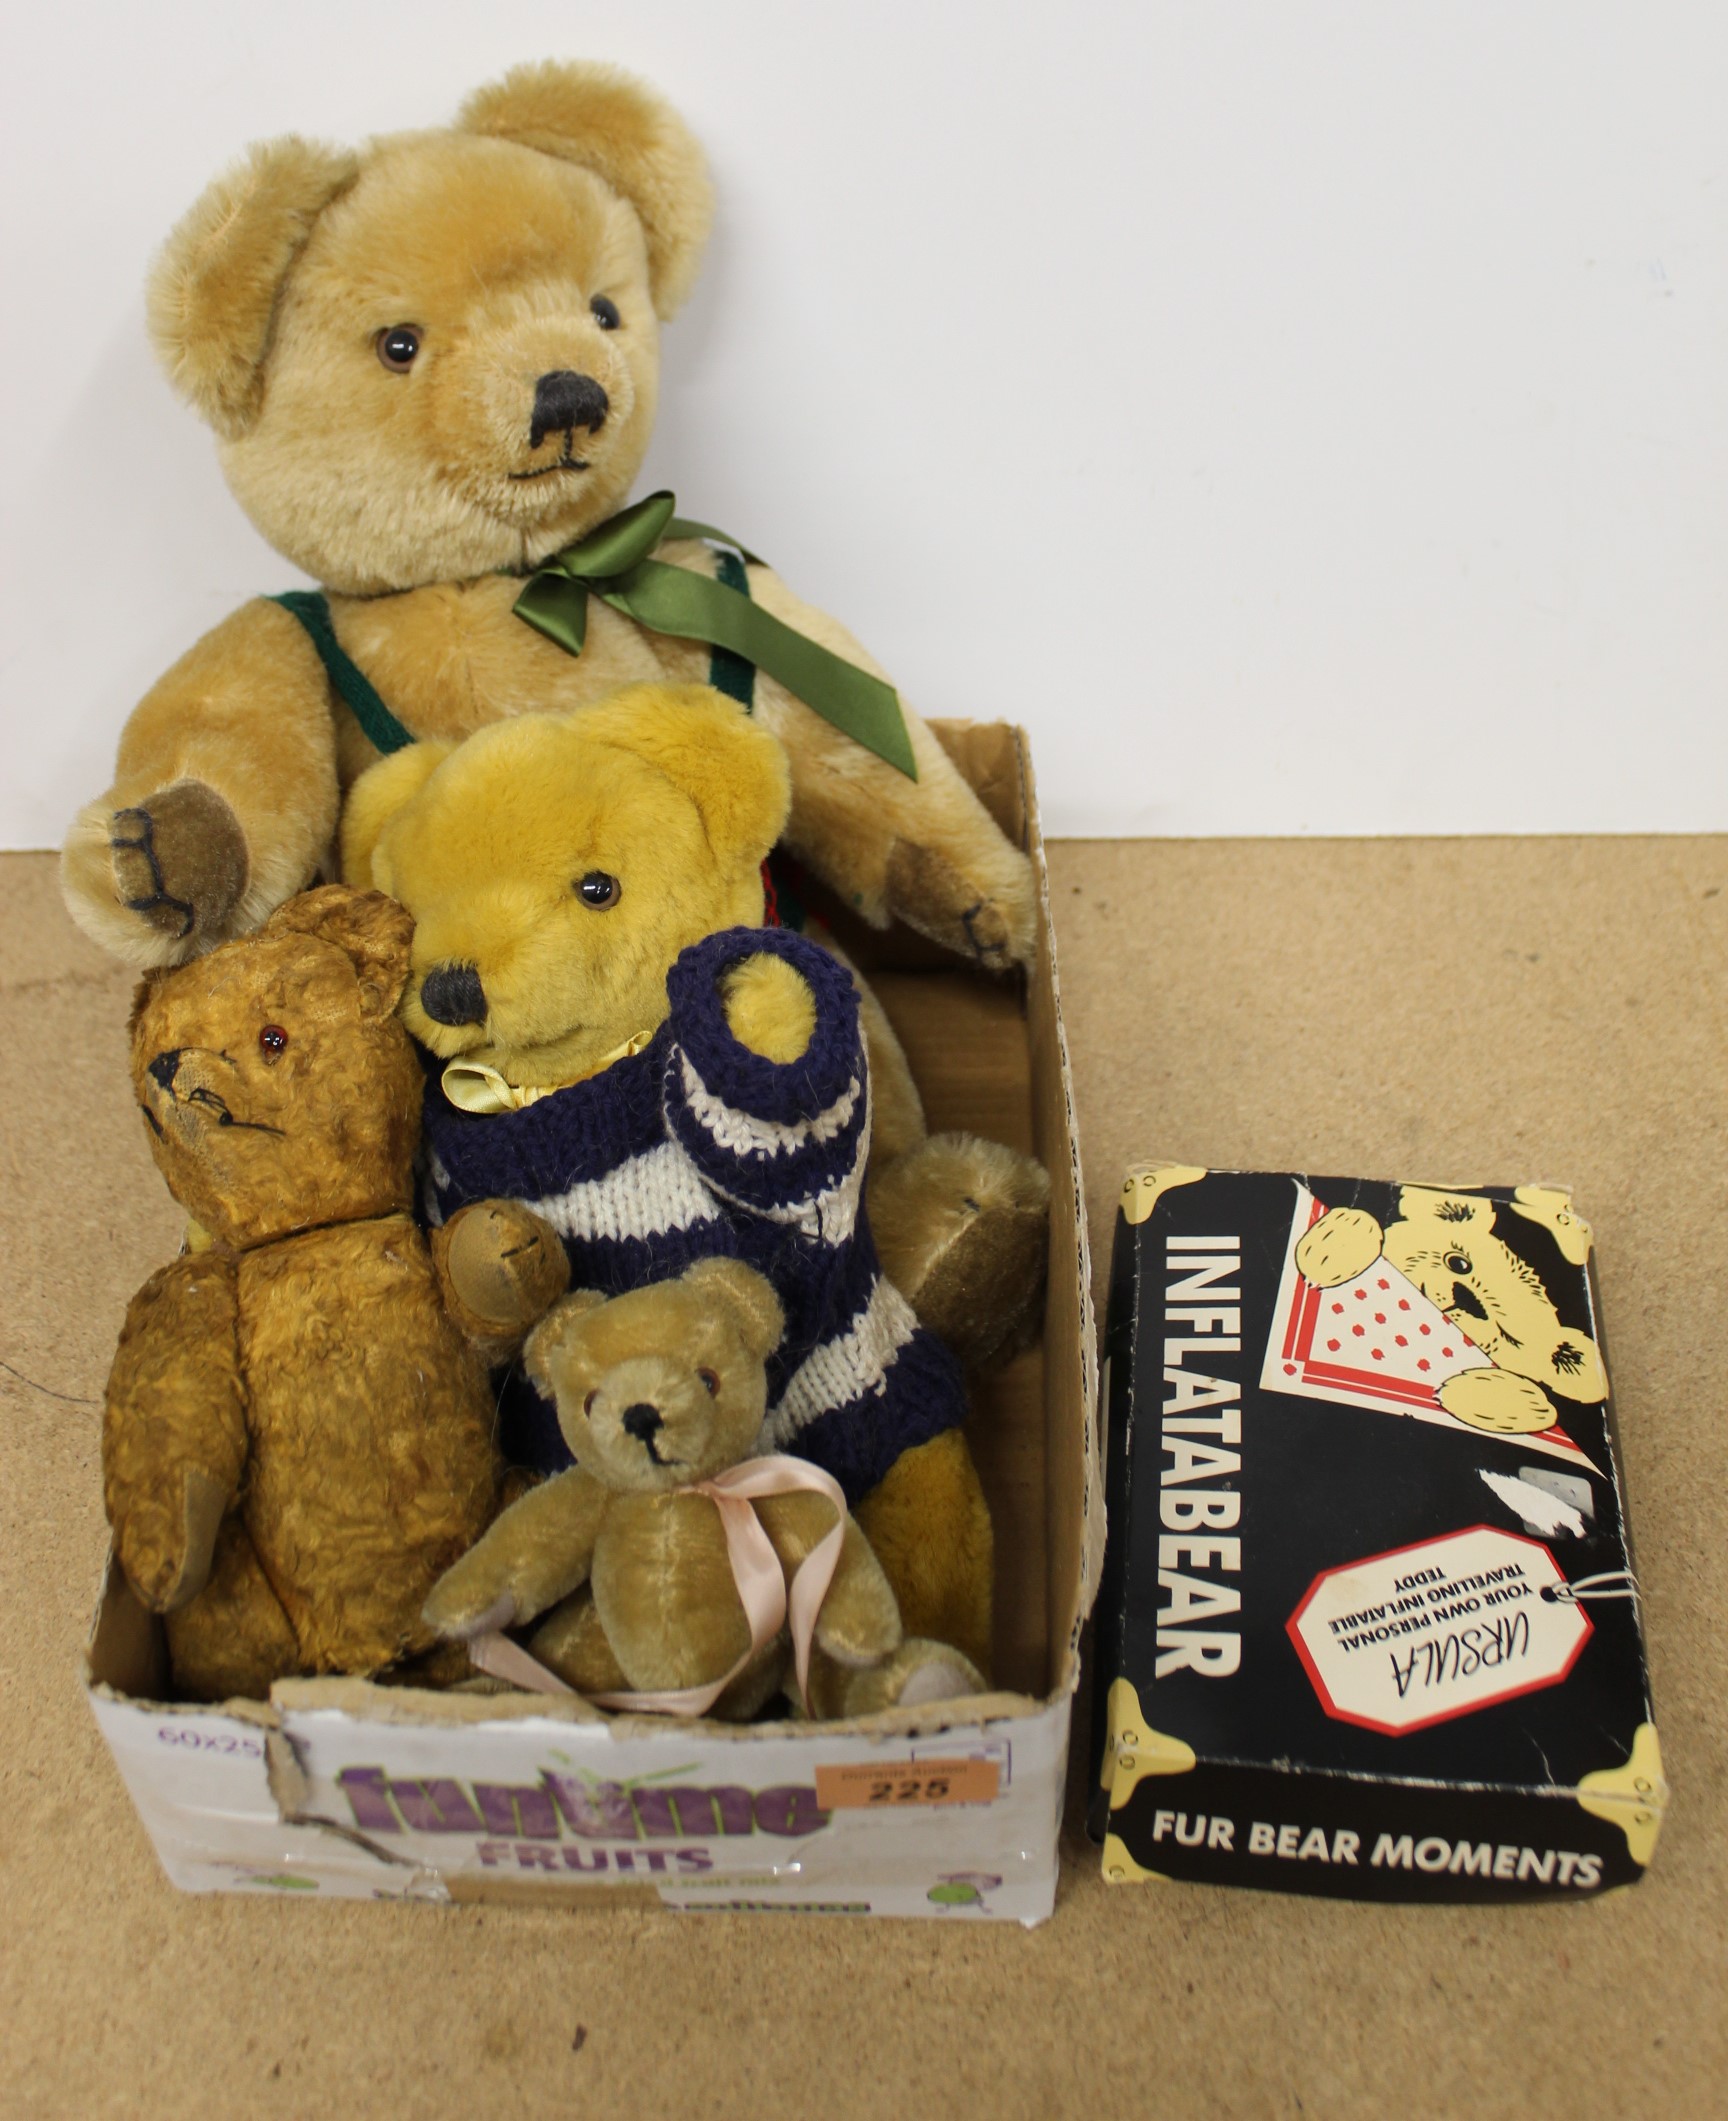 A Merrythought for Harrods bear plus one medium and one small Merrythought bears,